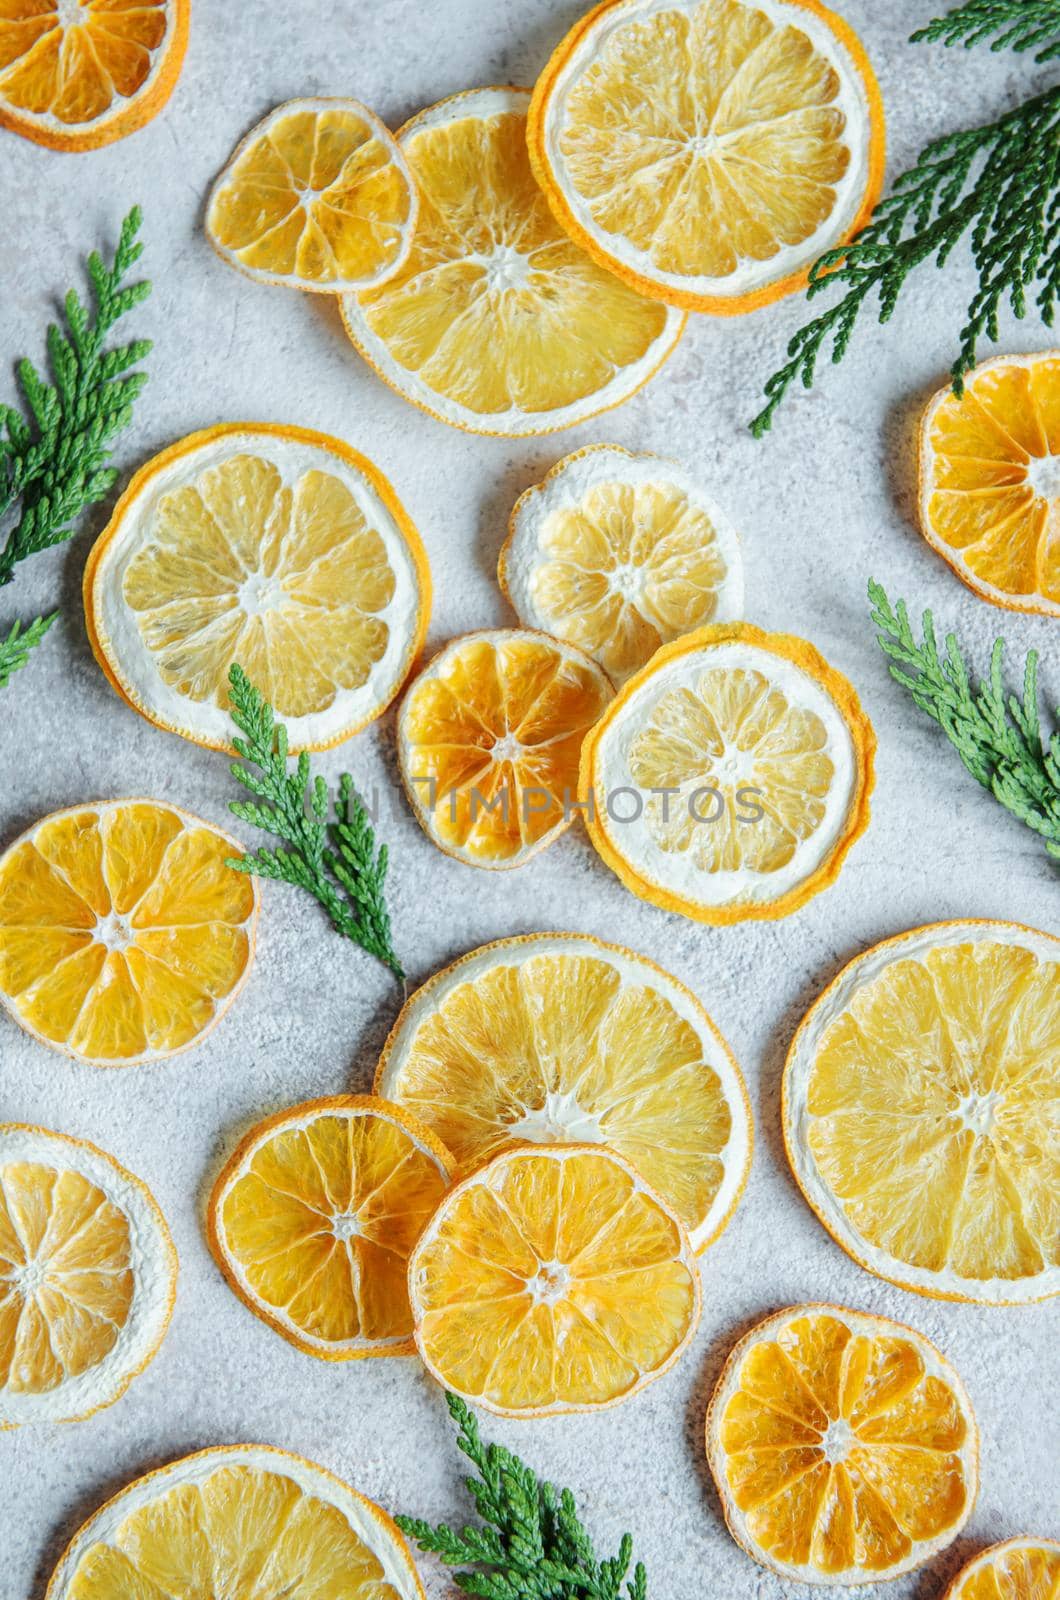 Natural dried oranges background by Almaje